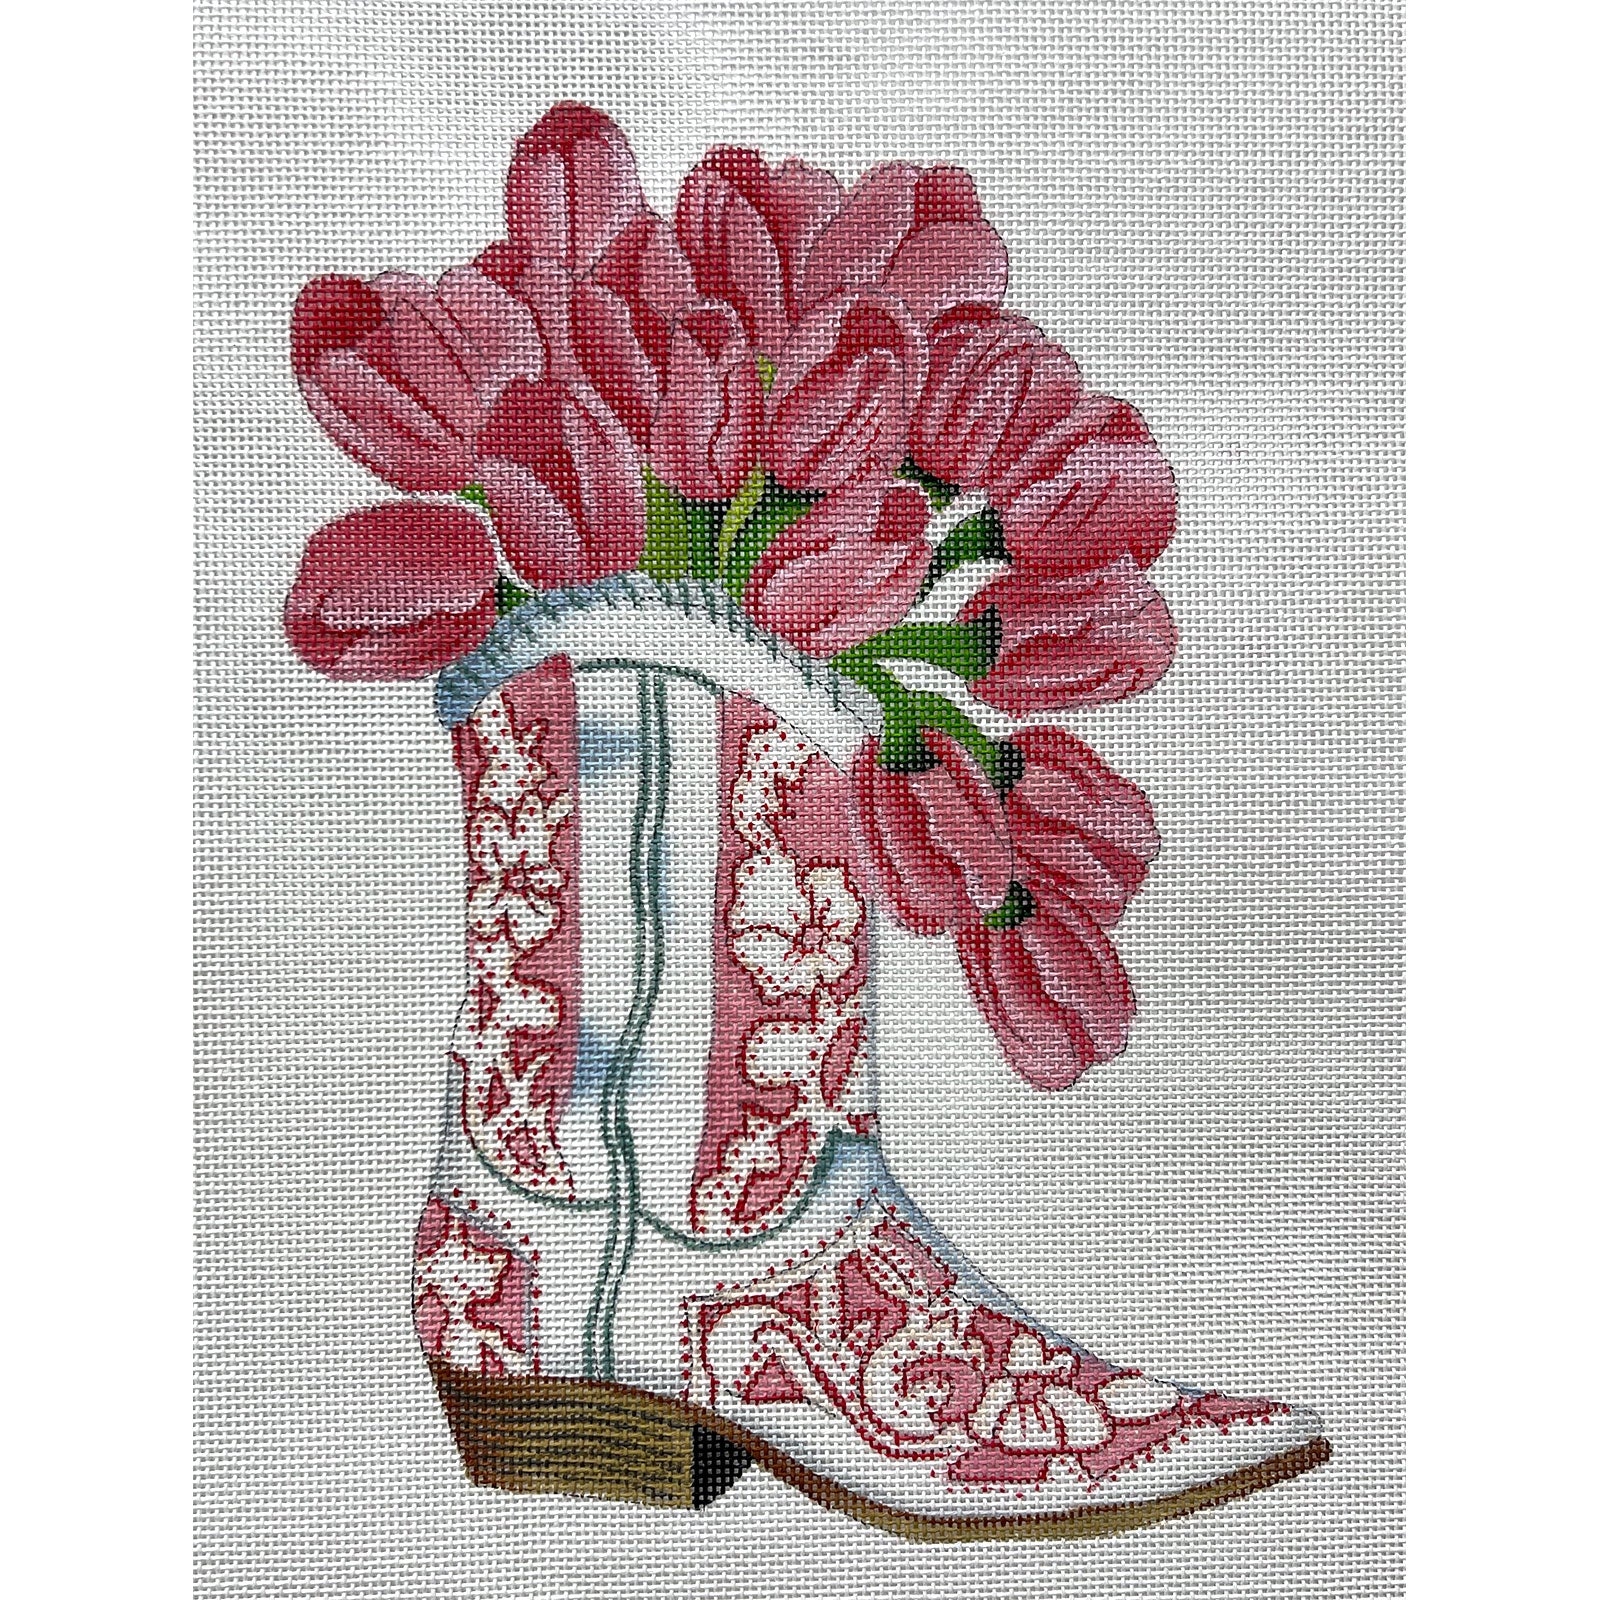 Tulips in Cowboy Boots - The Flying Needles